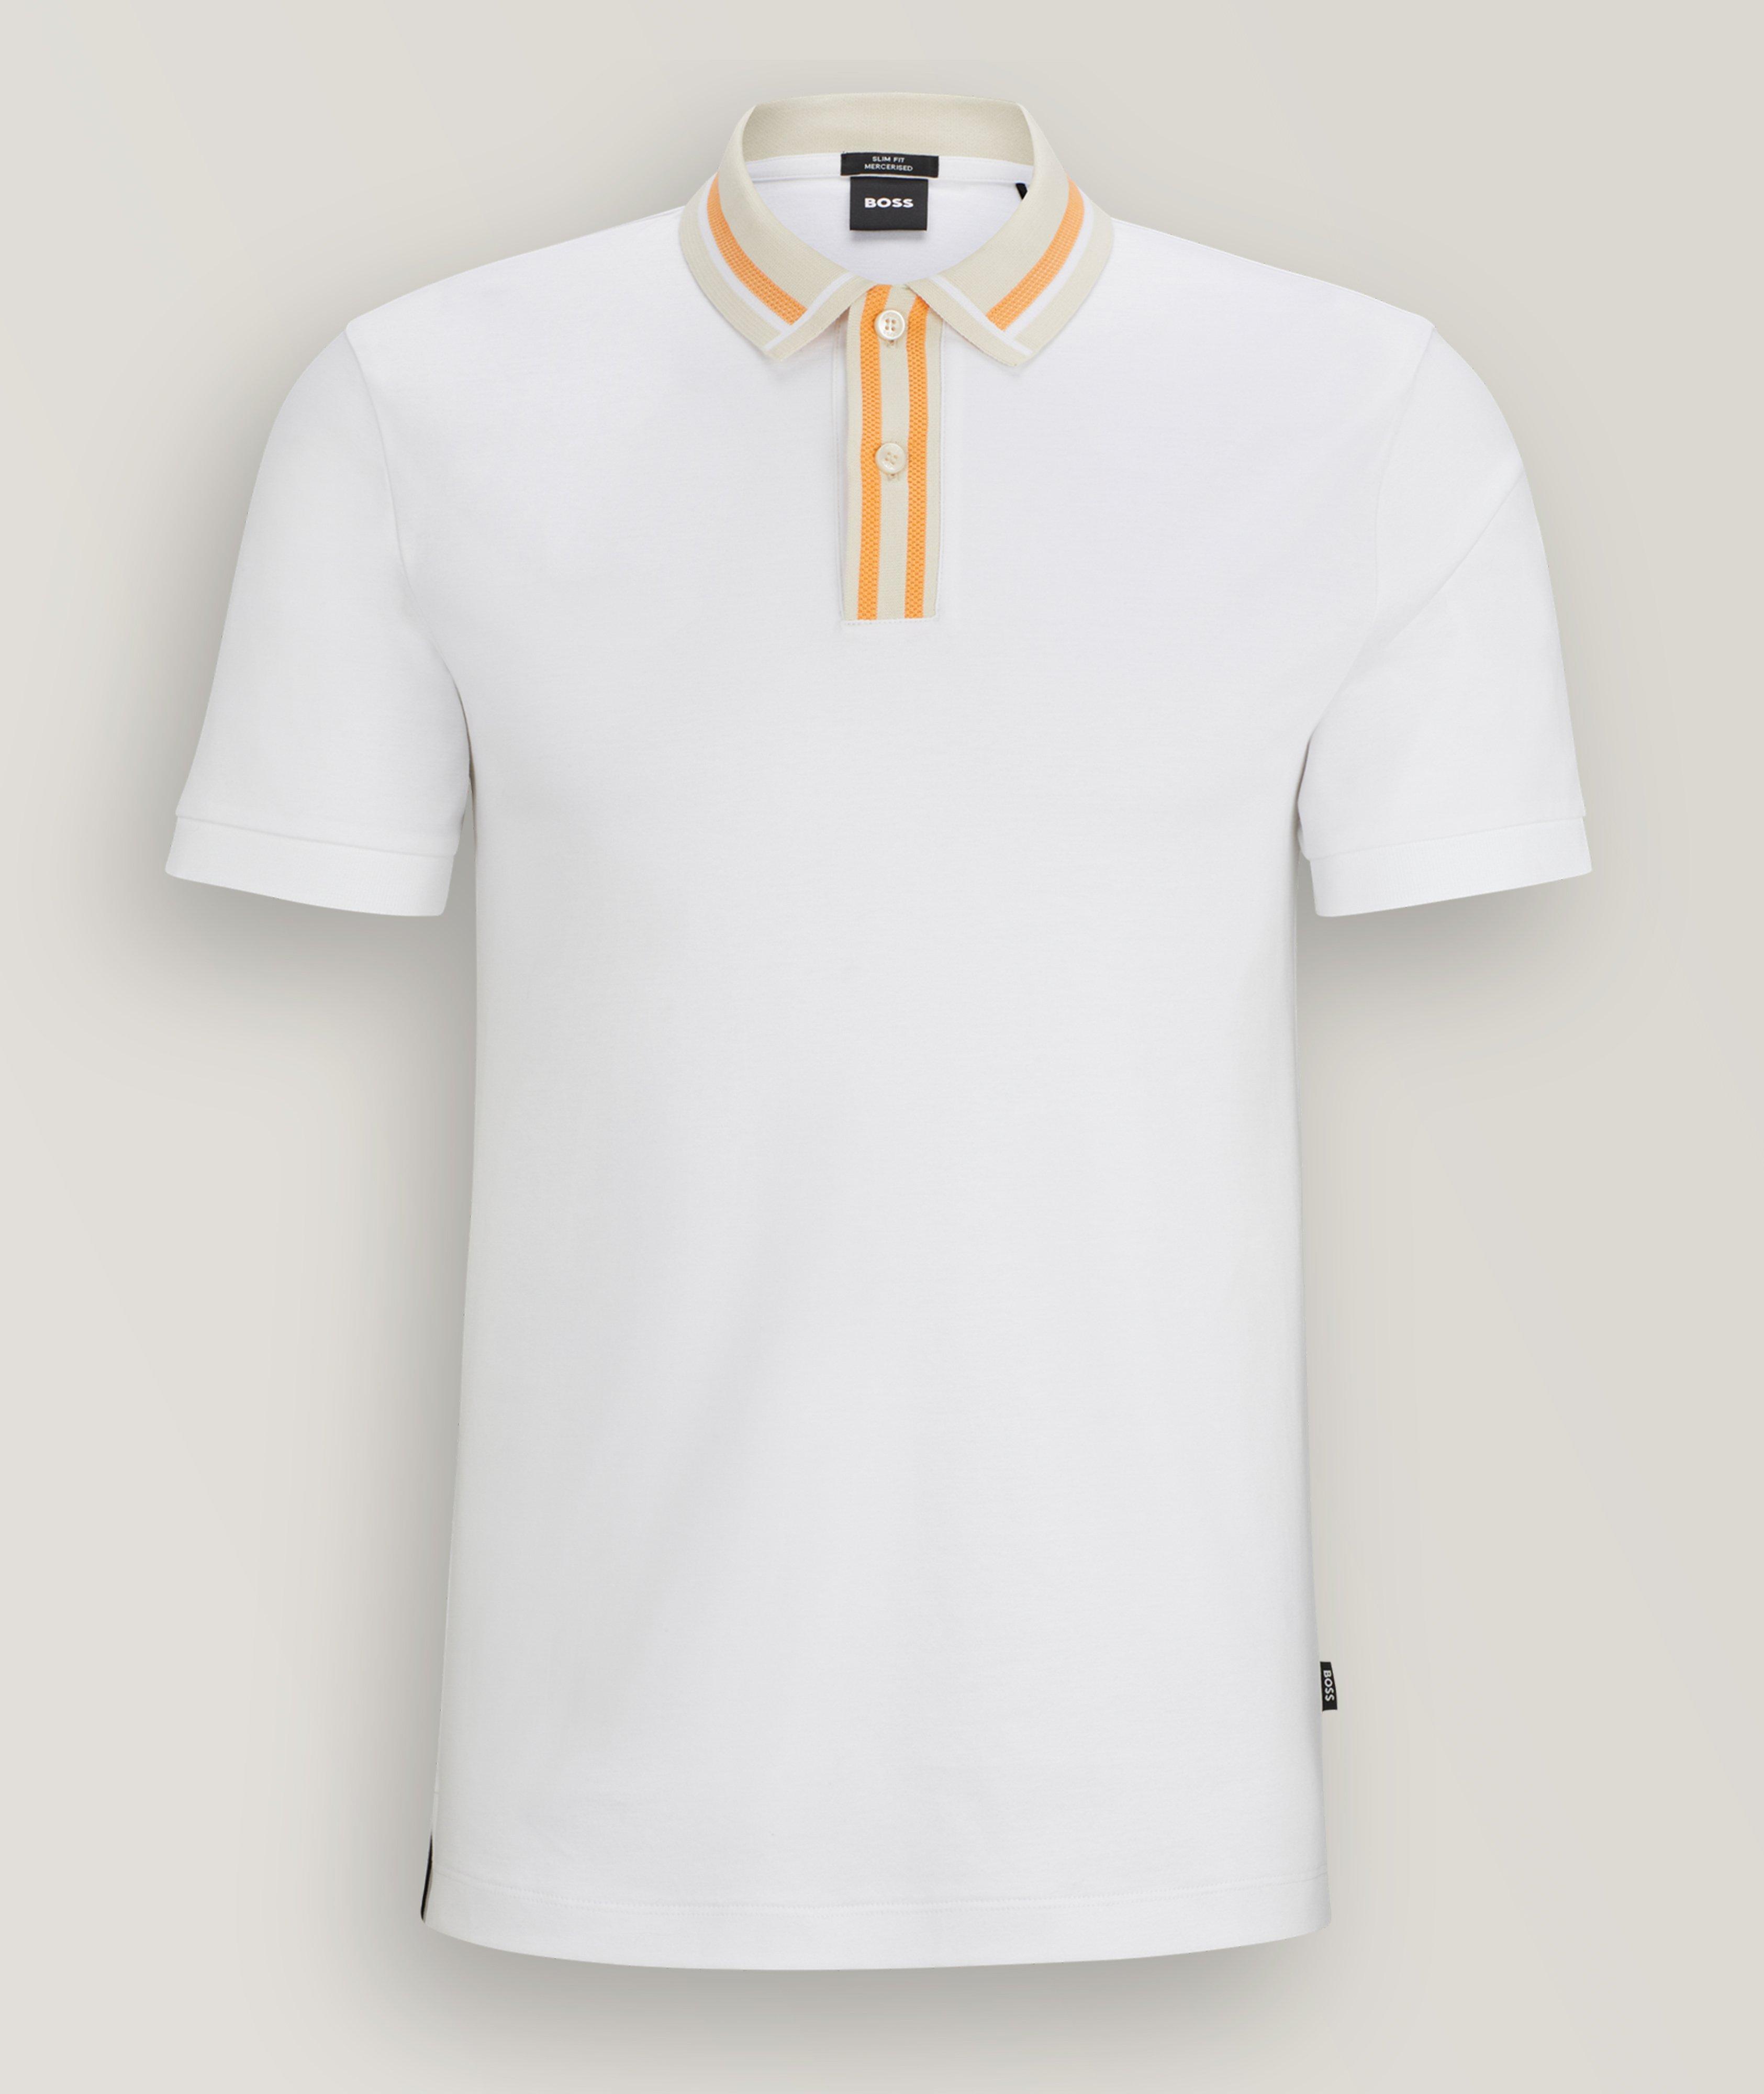 Responsible Contrast Striped Mercerised Cotton Polo image 0